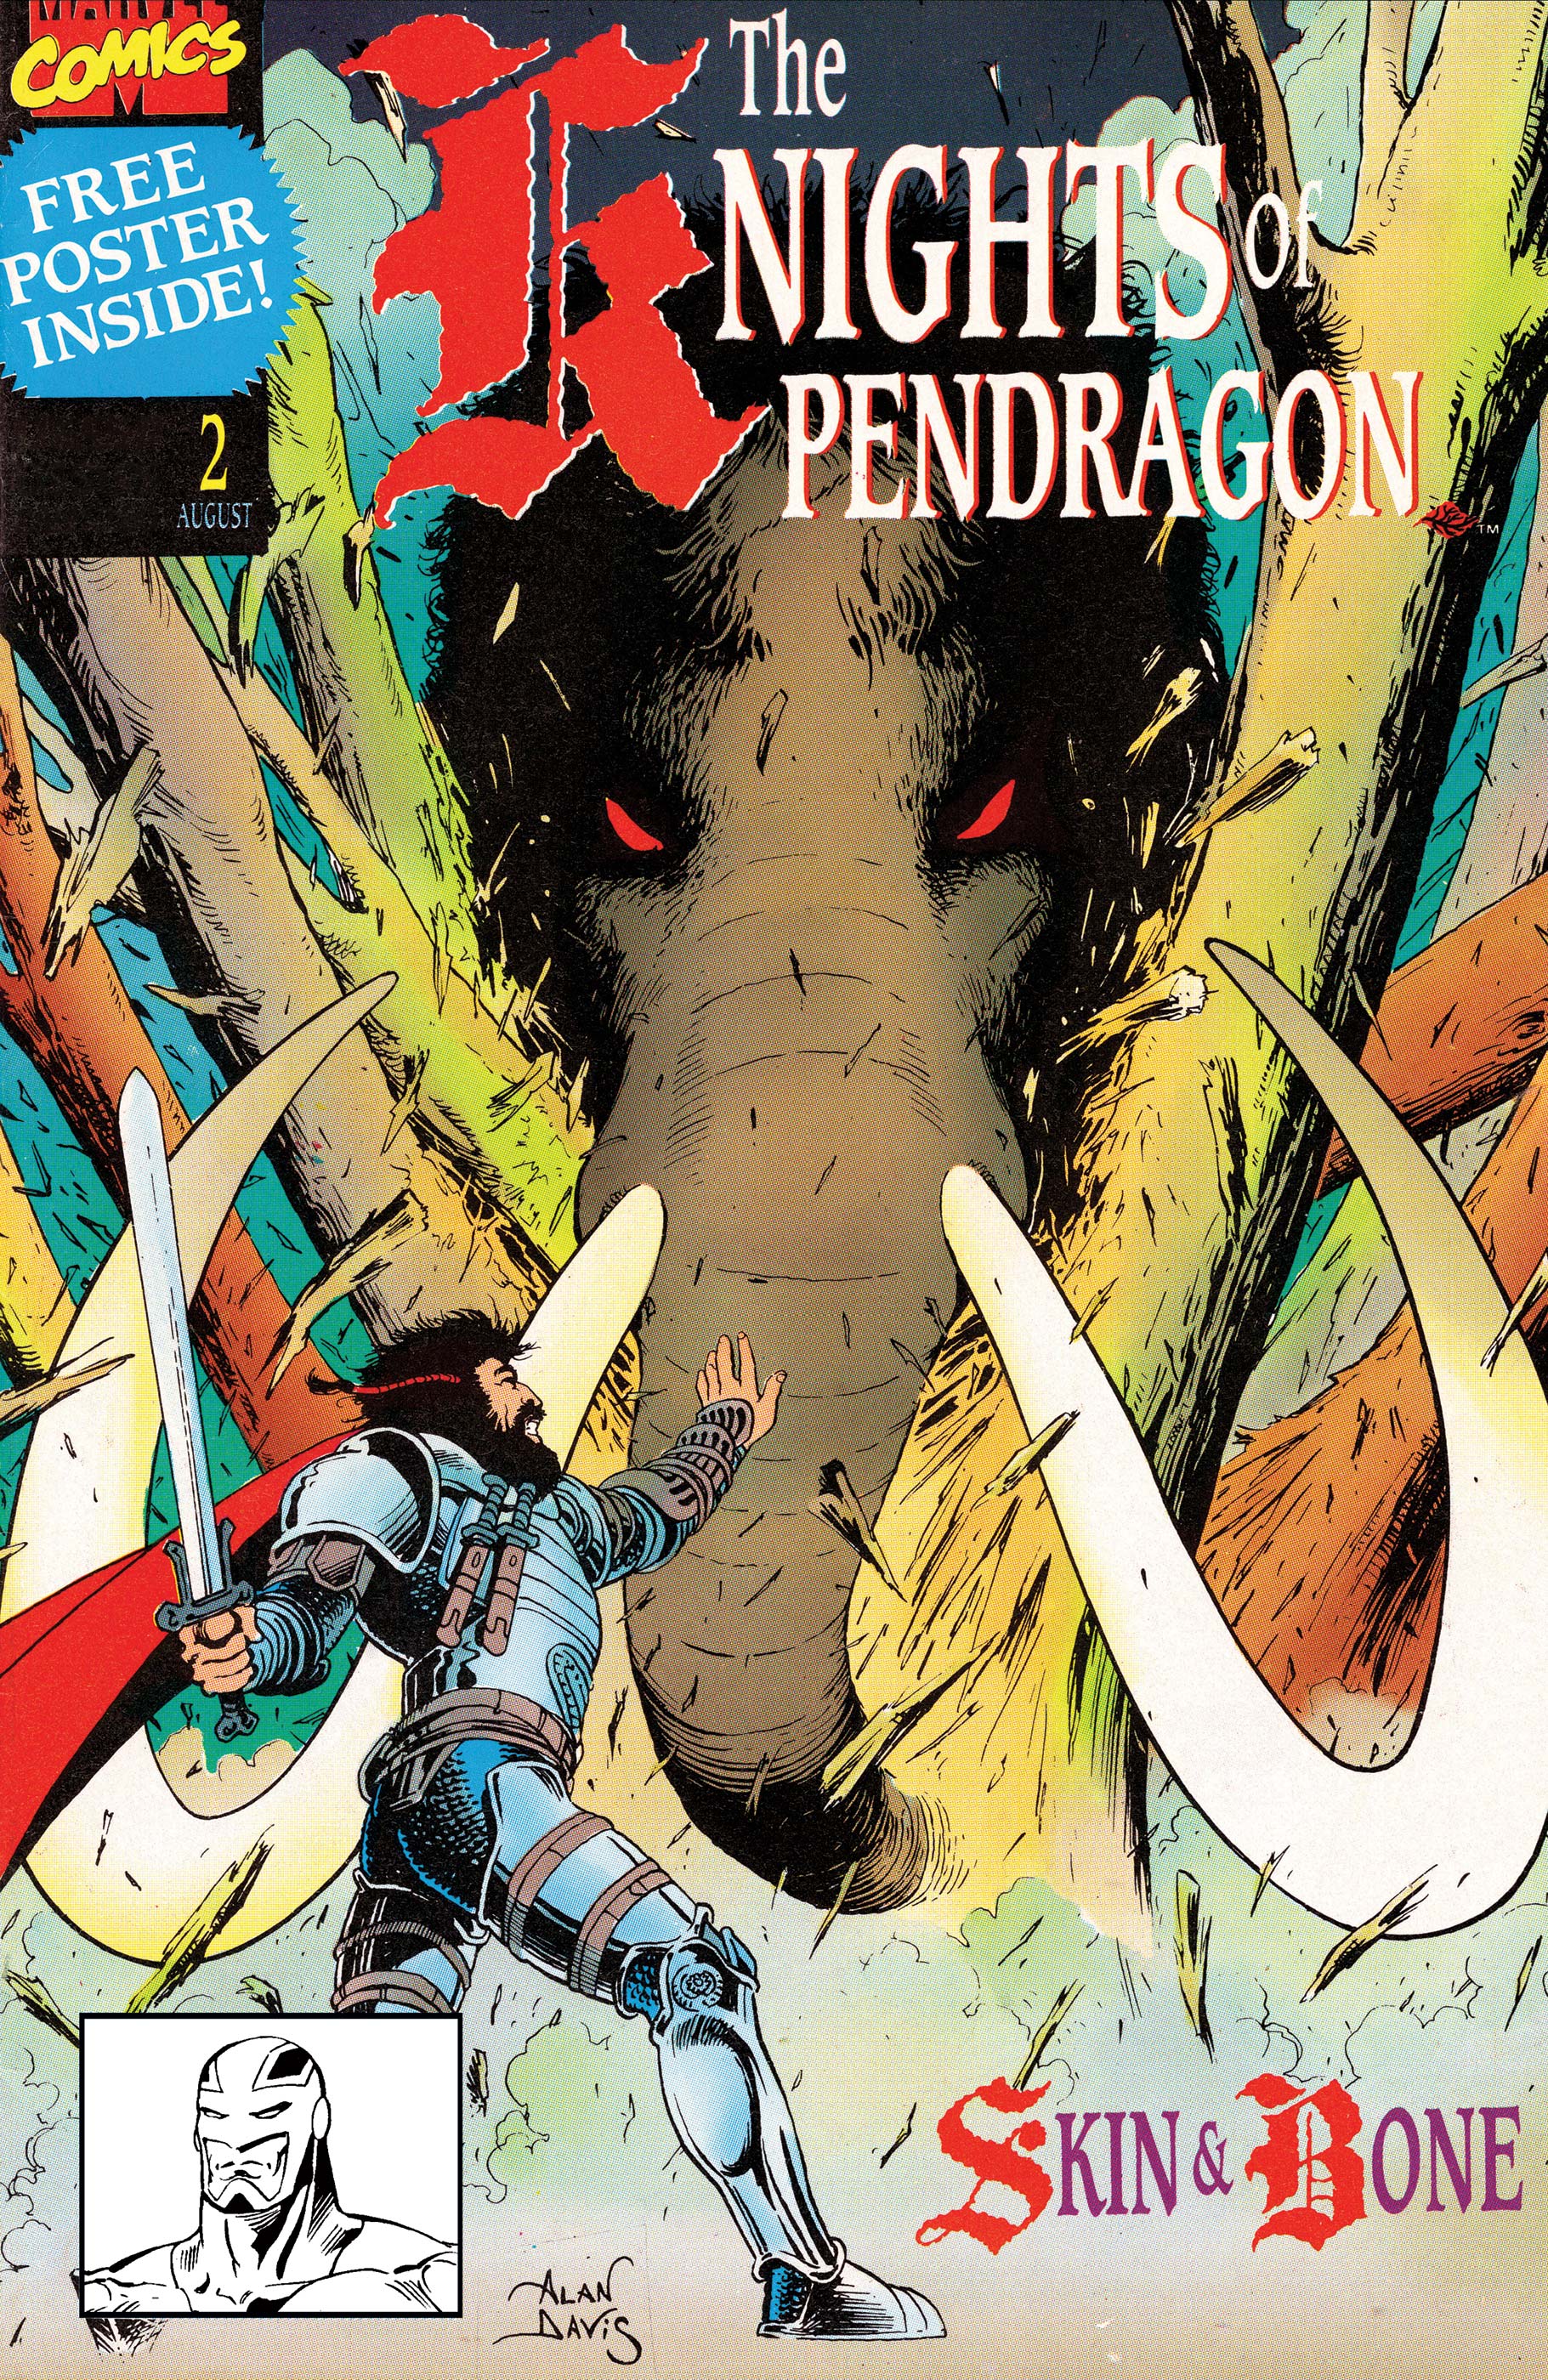 Knights of Pendragon (1990) #2